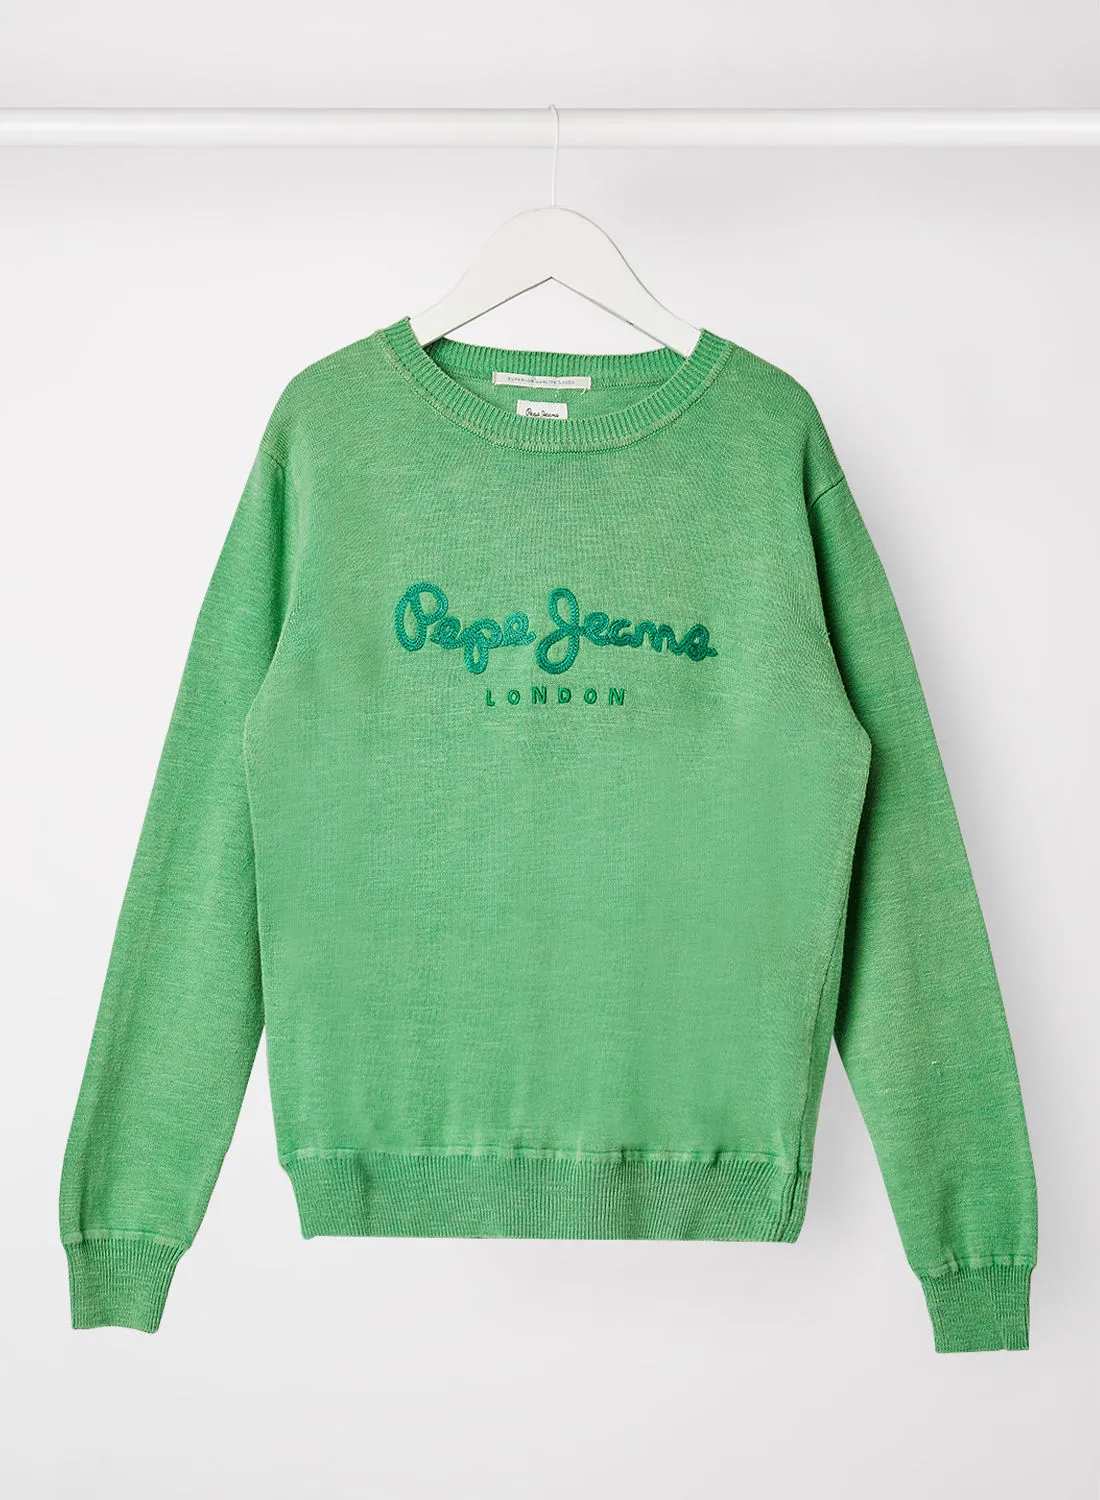 Pepe Jeans LONDON Kids/Teen Embroidered Logo Pullover Green